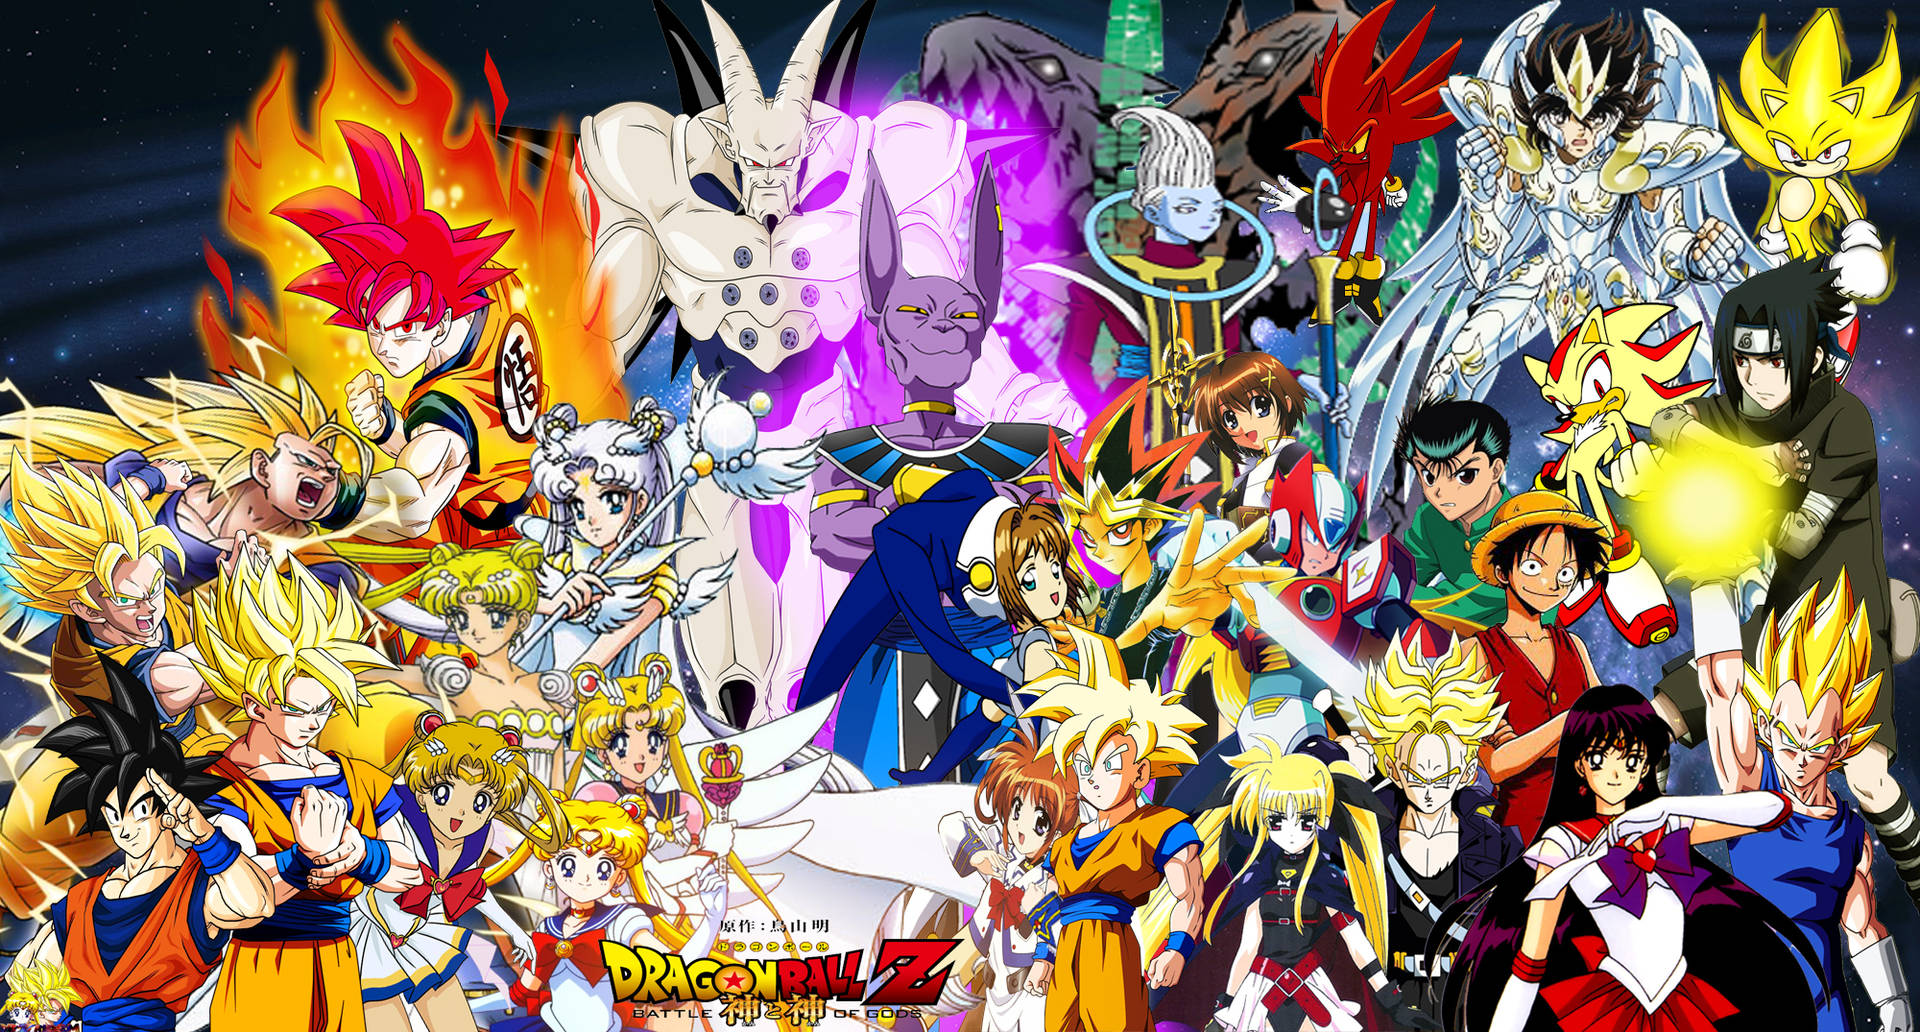 "Exploring the Universe with Cool Dragon Ball Z" Wallpaper